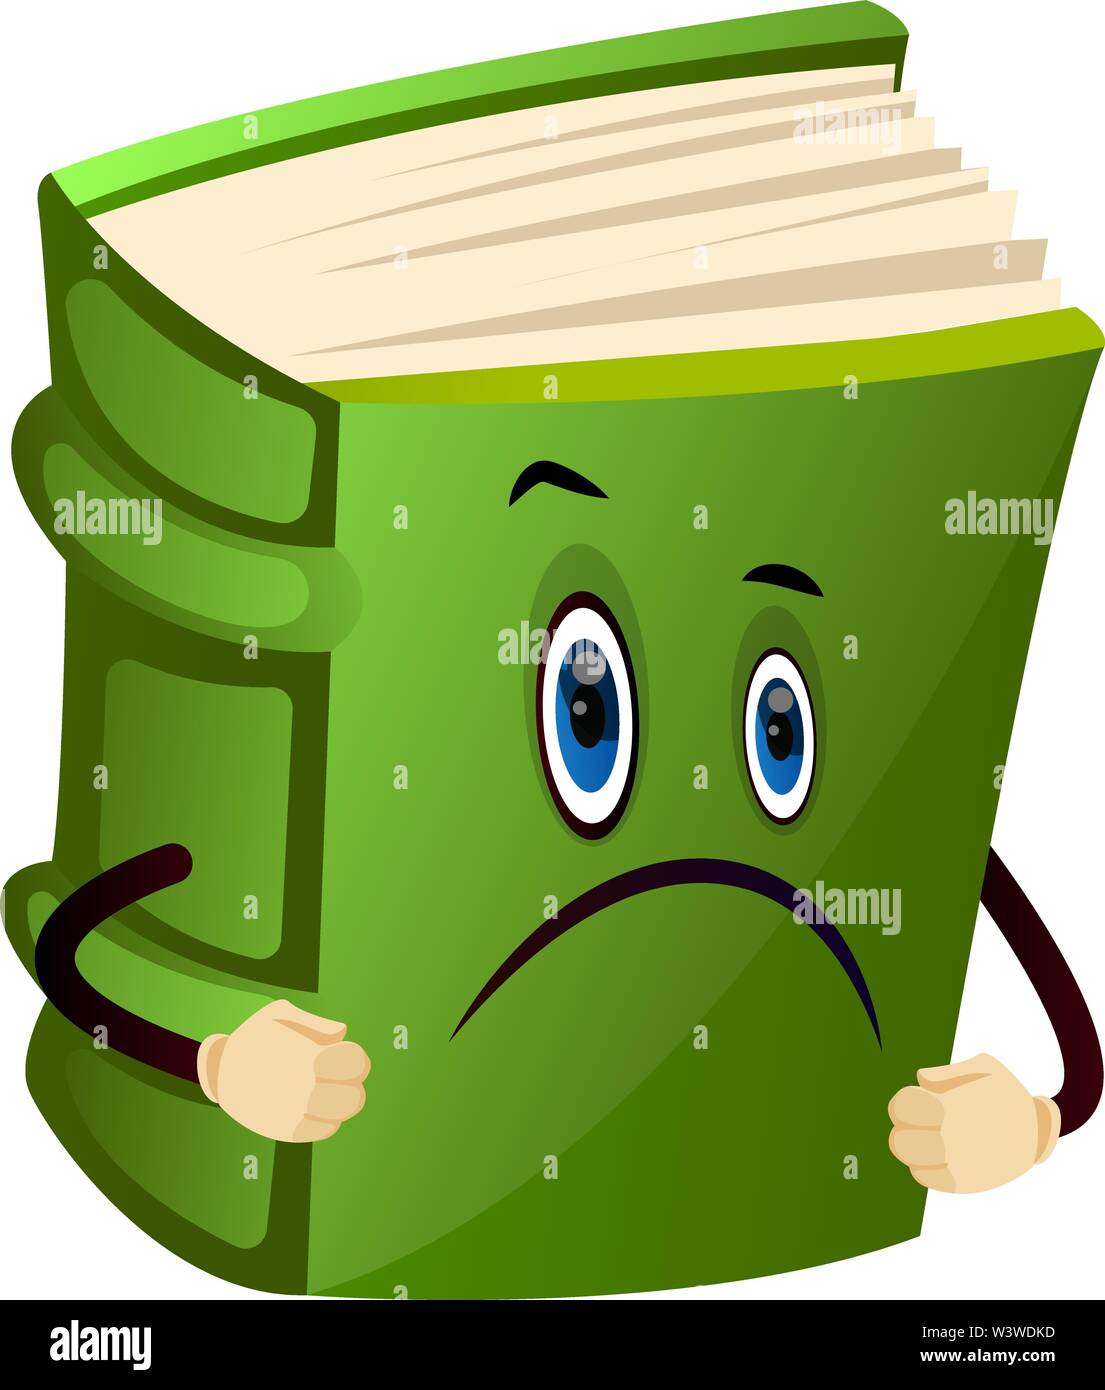 Cartoon book character is feeling surprised, illustration, vector on white background. Stock Vector